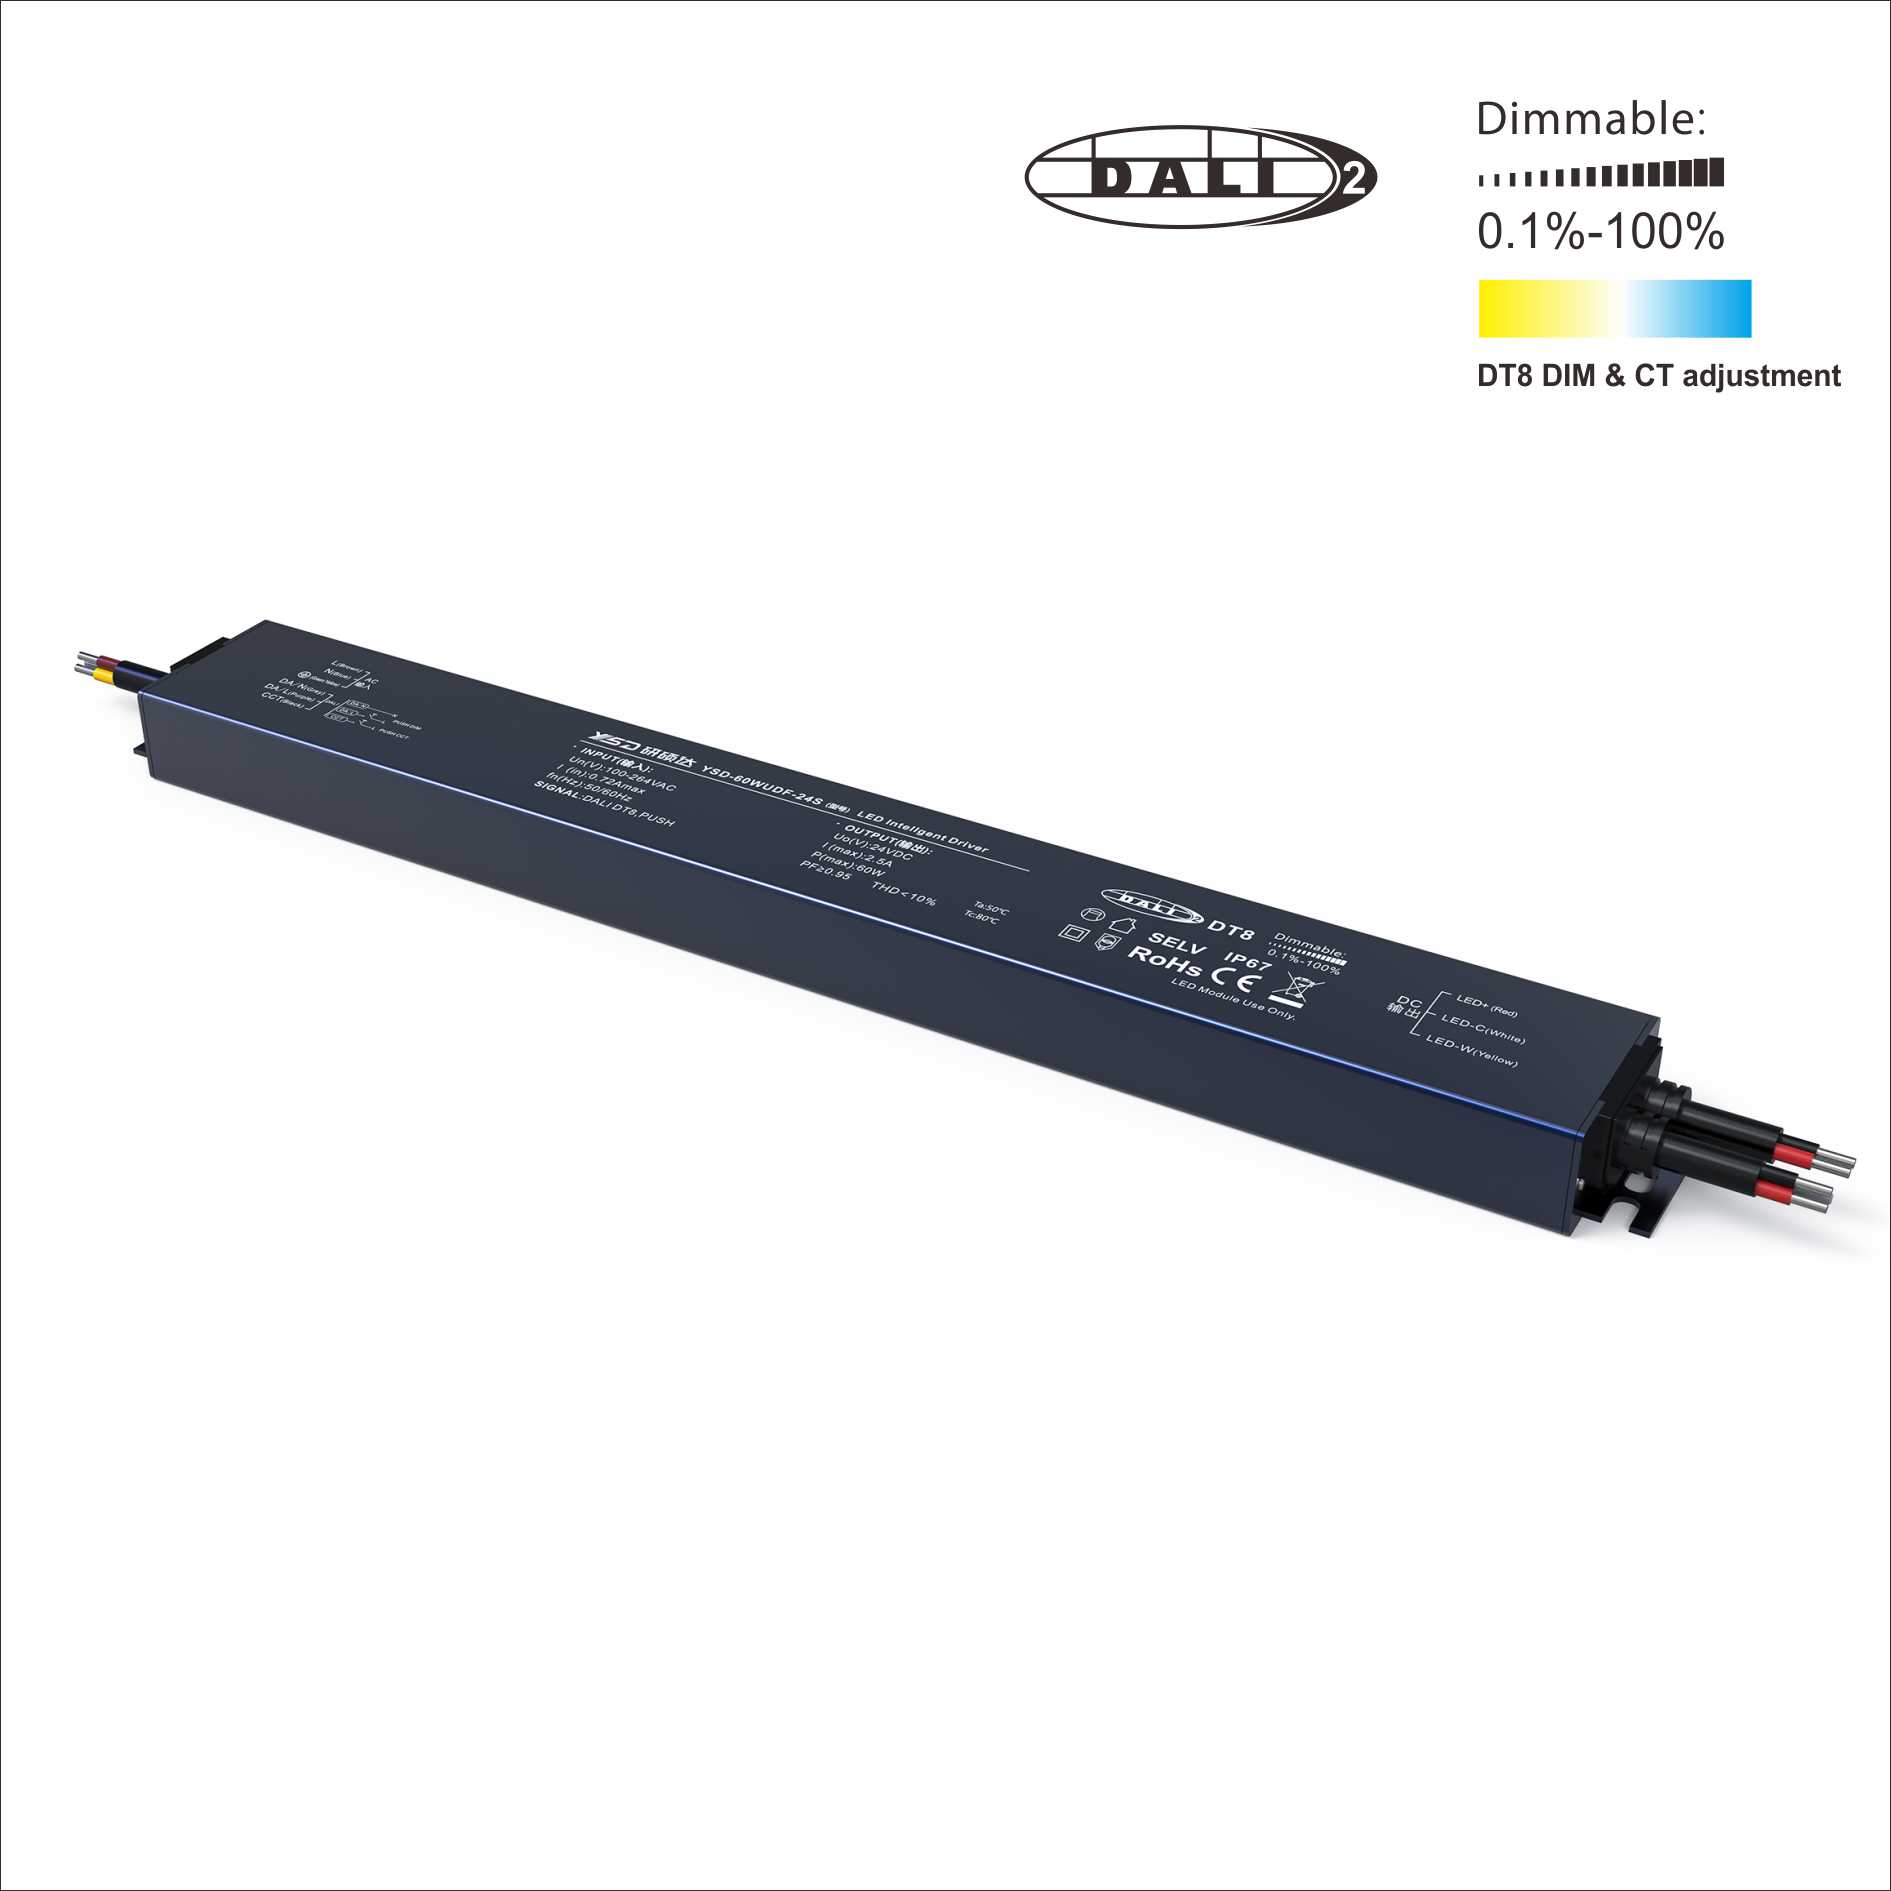 12/24V 60W DALI DT8 PUSH  Dimmable Waterproof LED Power Supply